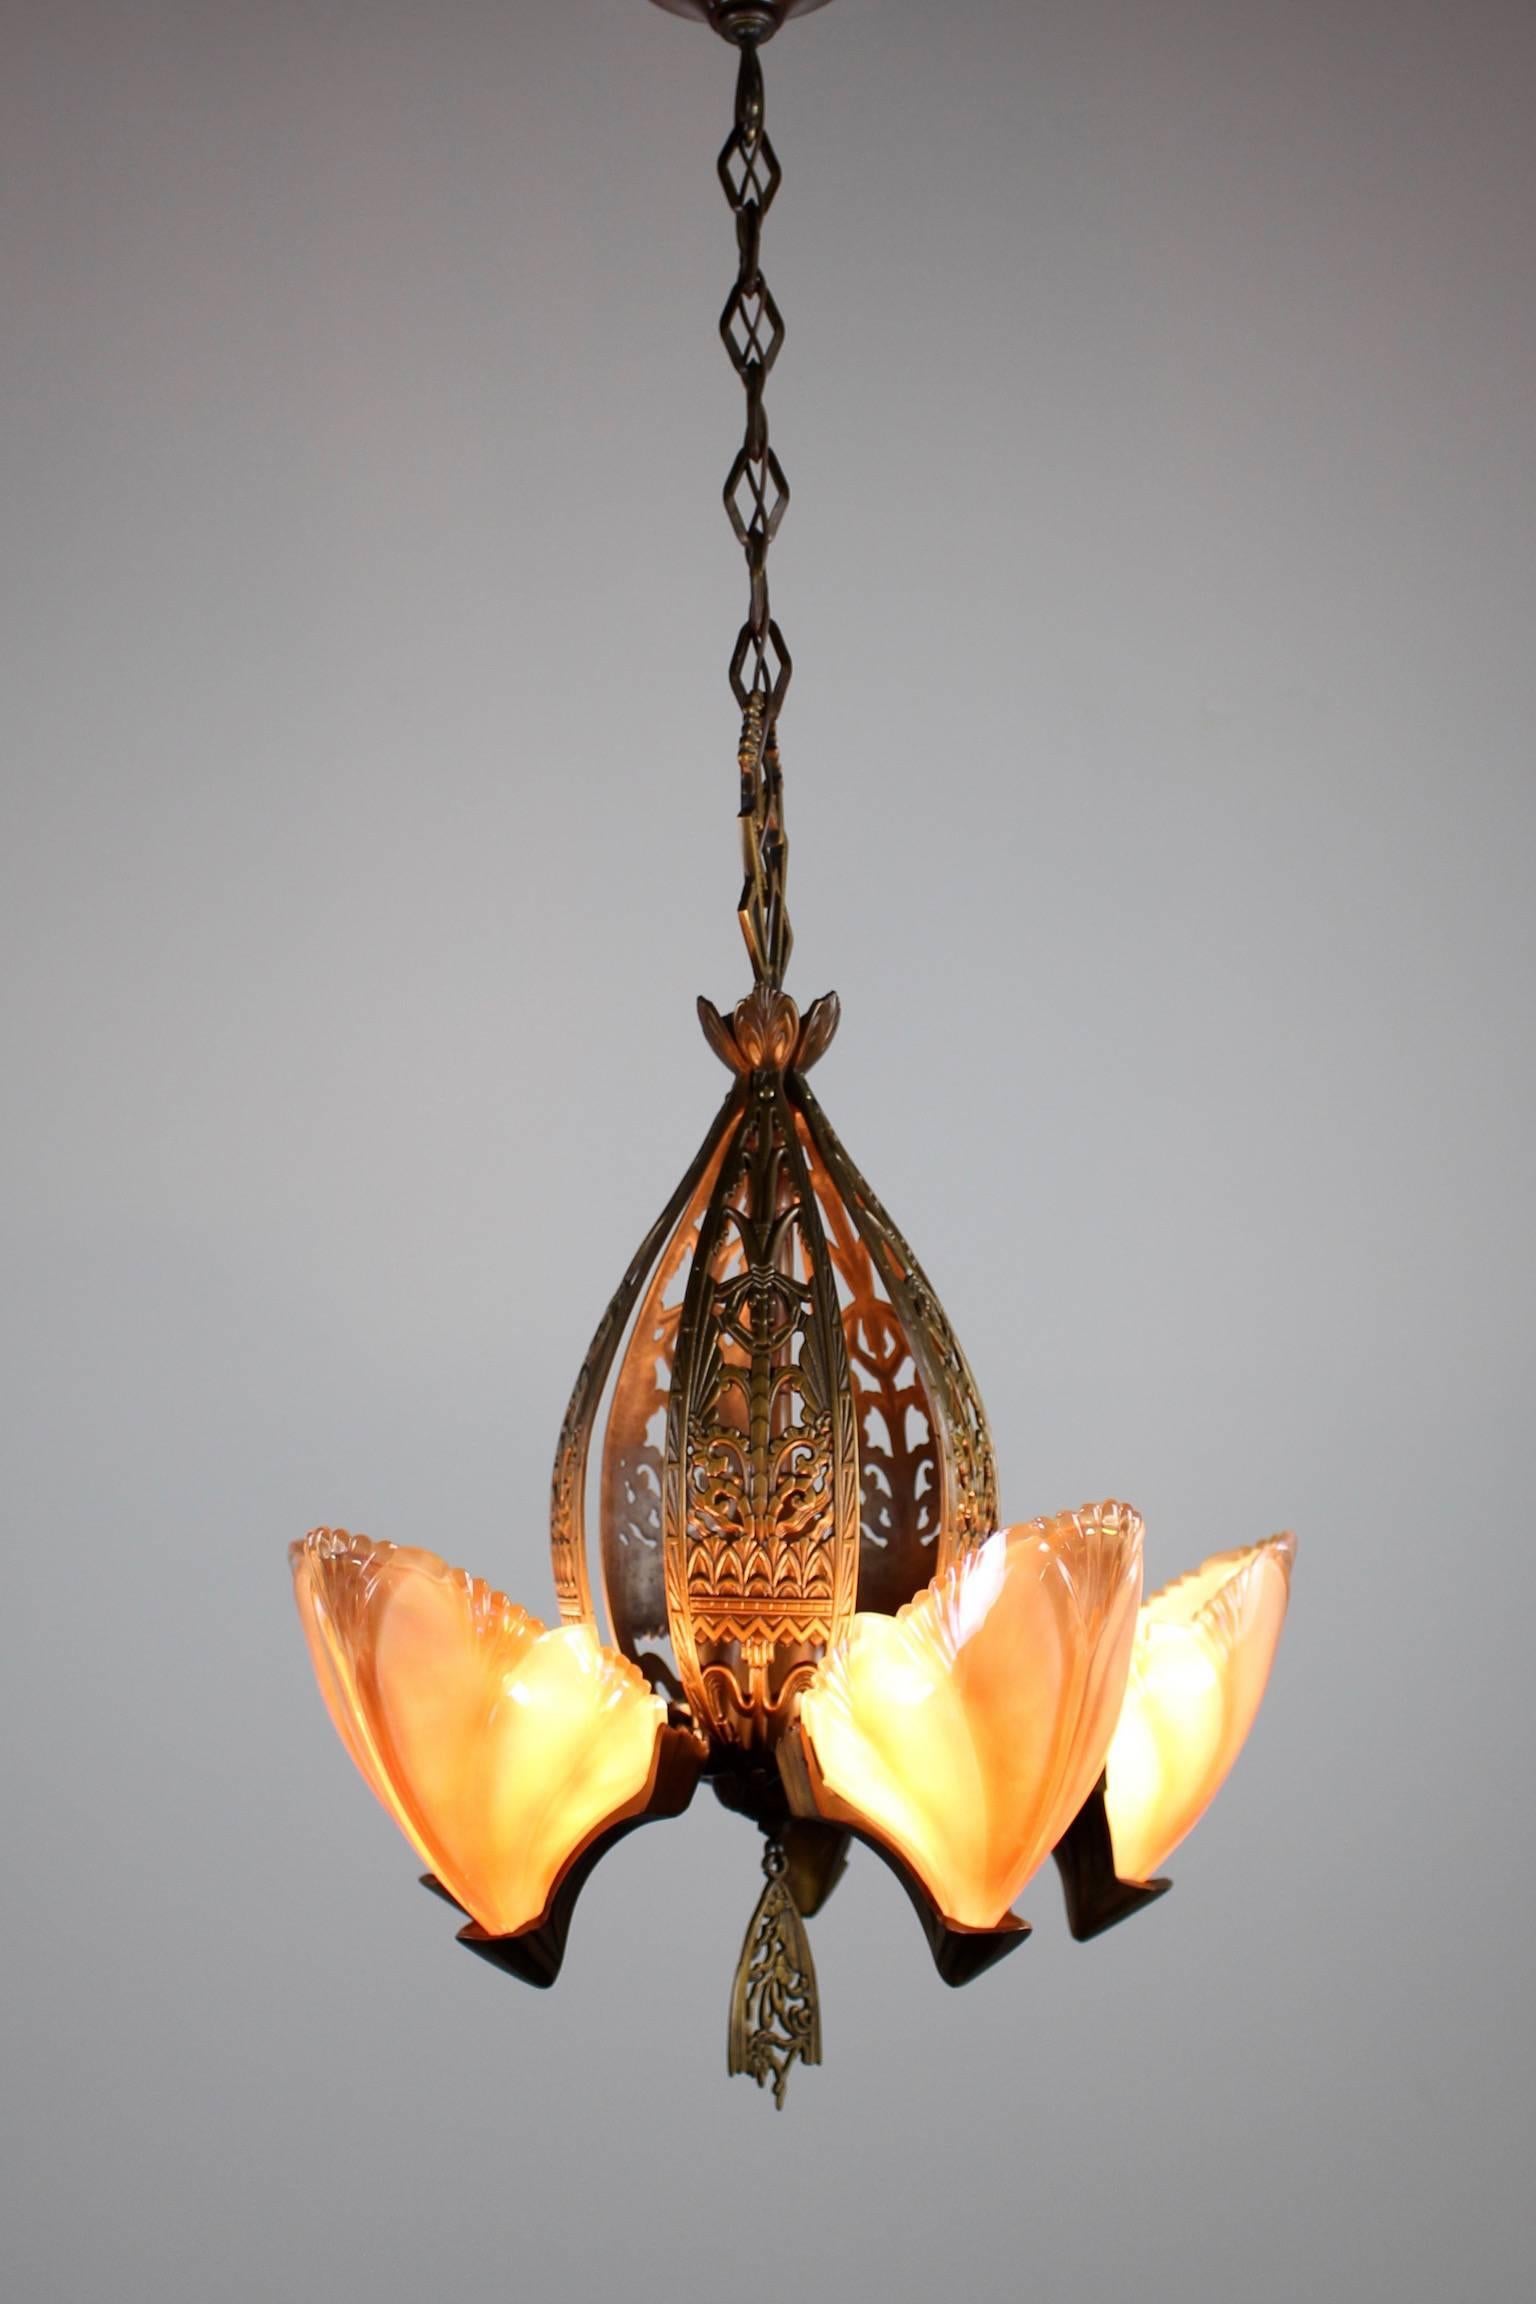 An absolutely beautiful and original Art Deco slip-shade fixture with five slip shades original to the fixture. These gorgeous shades are in a shiny 'oyster' coloured iridescent semi-opaque glass. Gorgeously decorated cut-out brass body in a warm